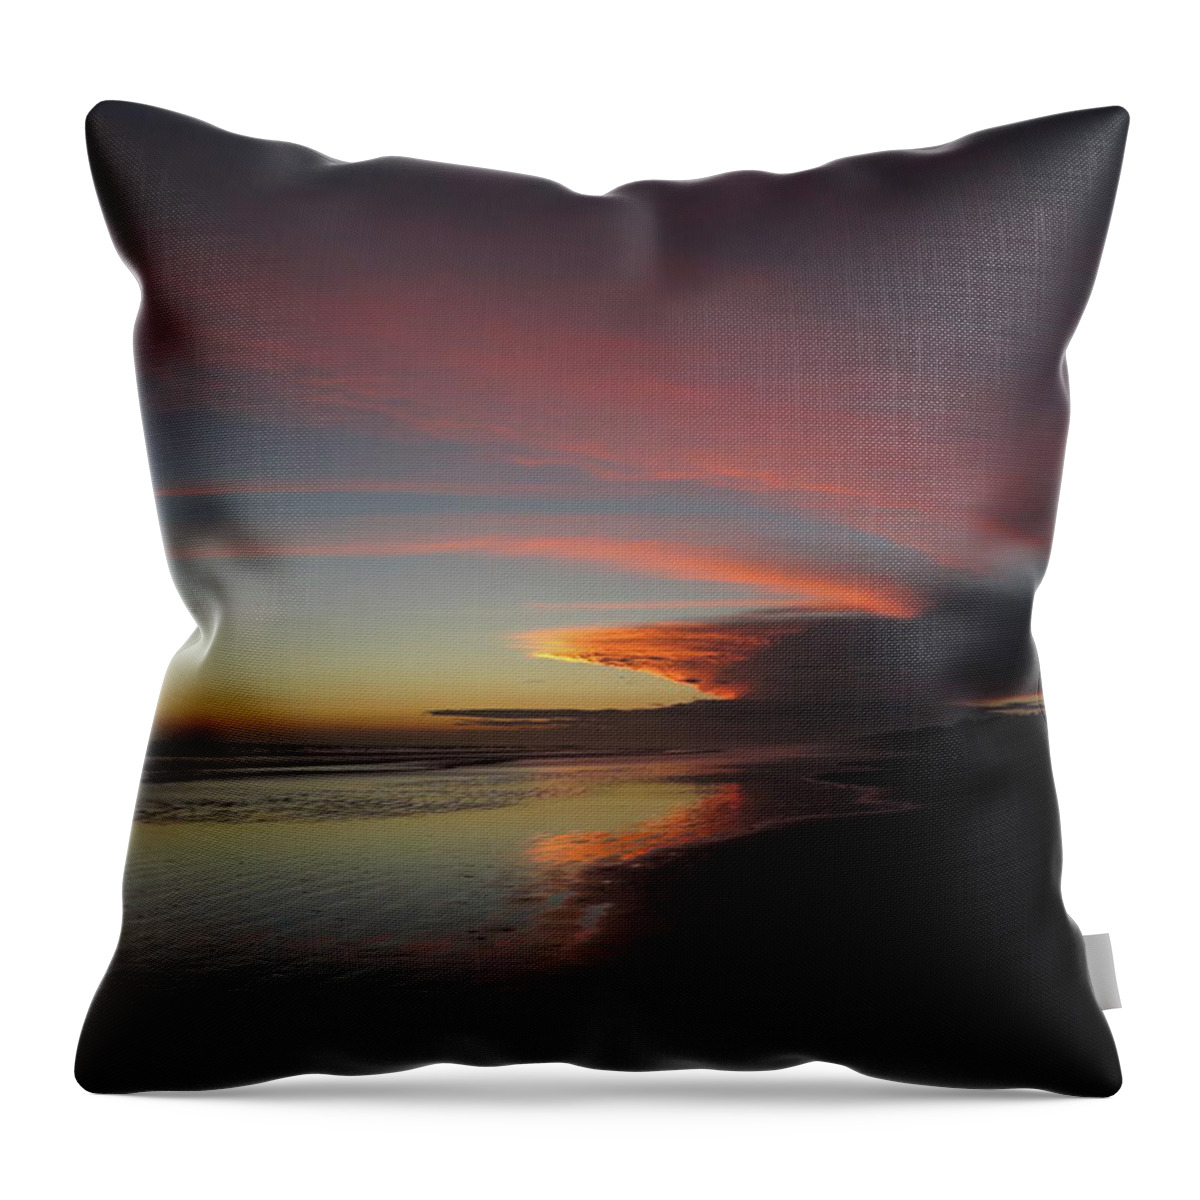 Sunset Throw Pillow featuring the photograph Sunset Las Lajas by Daniel Reed